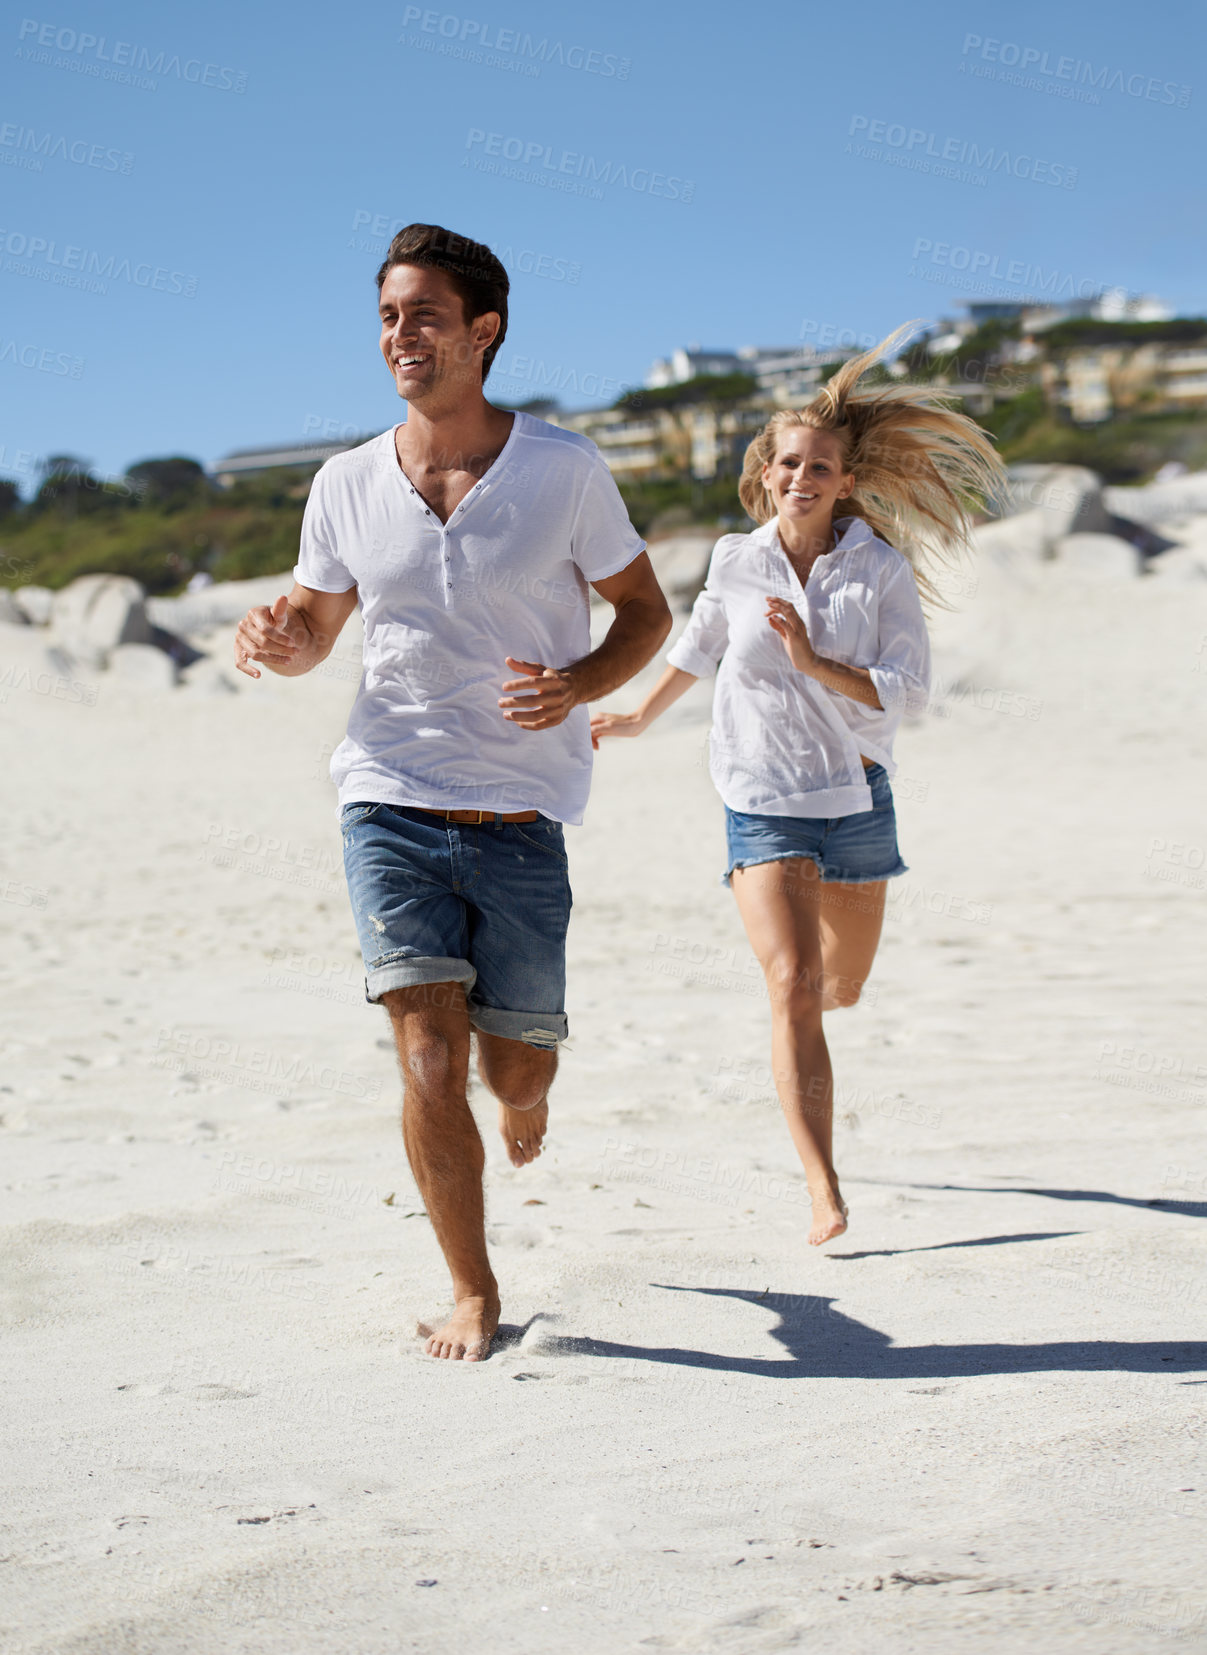 Buy stock photo Couple, running and summer on beach, smile and outdoor in sunshine for vacation, adventure and travel. Man, woman and happy on sand for love, bonding and holiday by sea with exercise in Naples, Italy